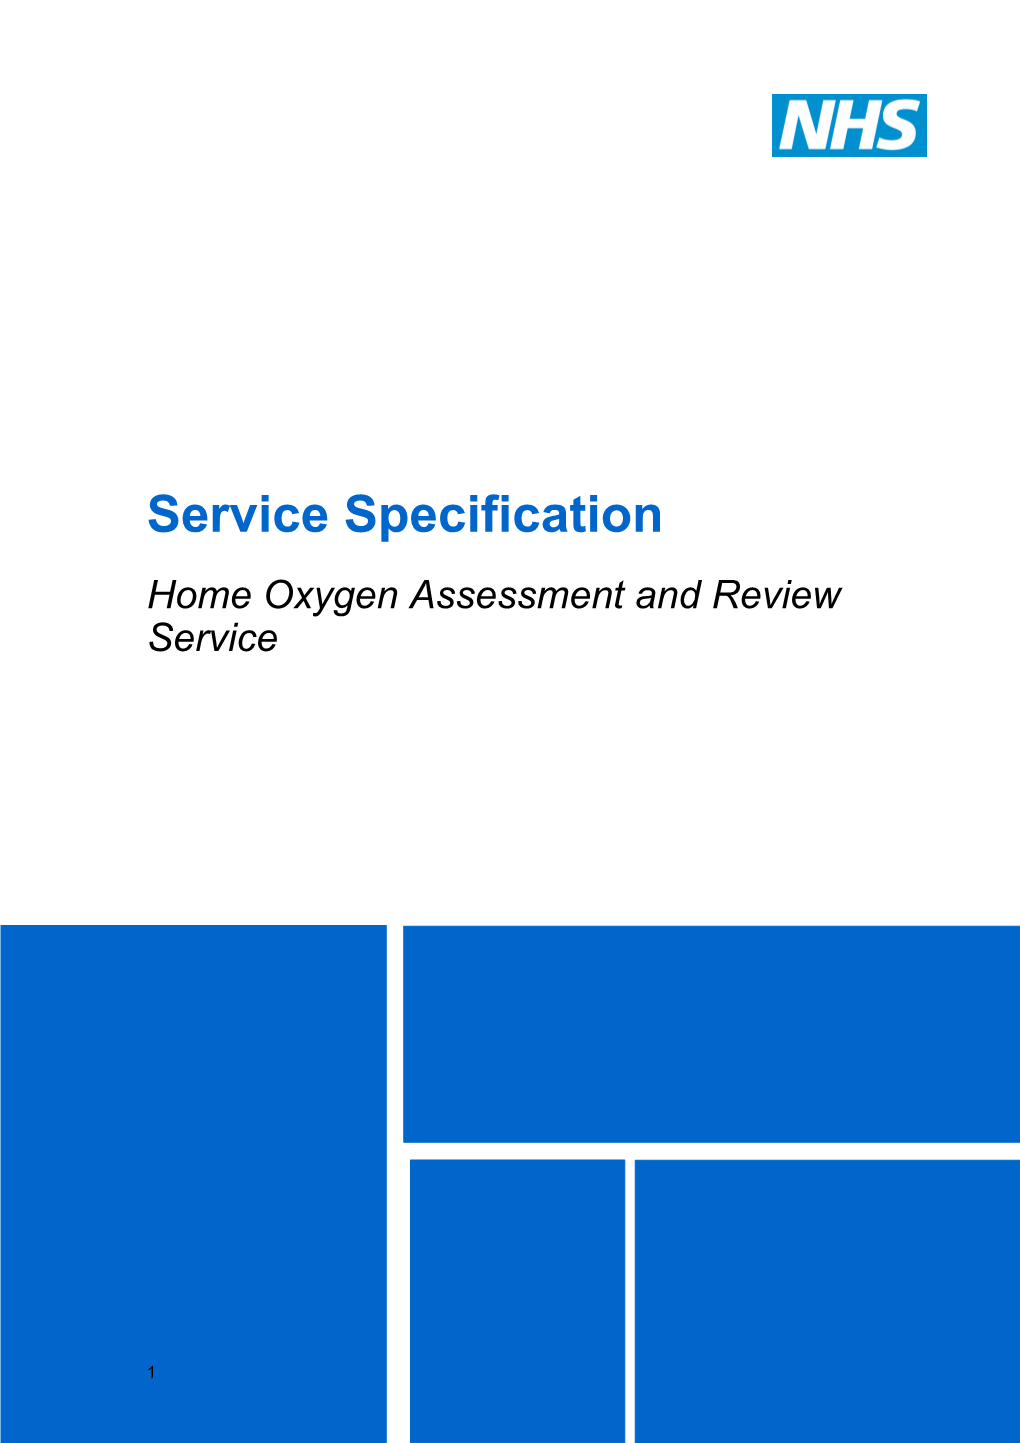 Service Specification: Home Oxygen Assessment and Review Service